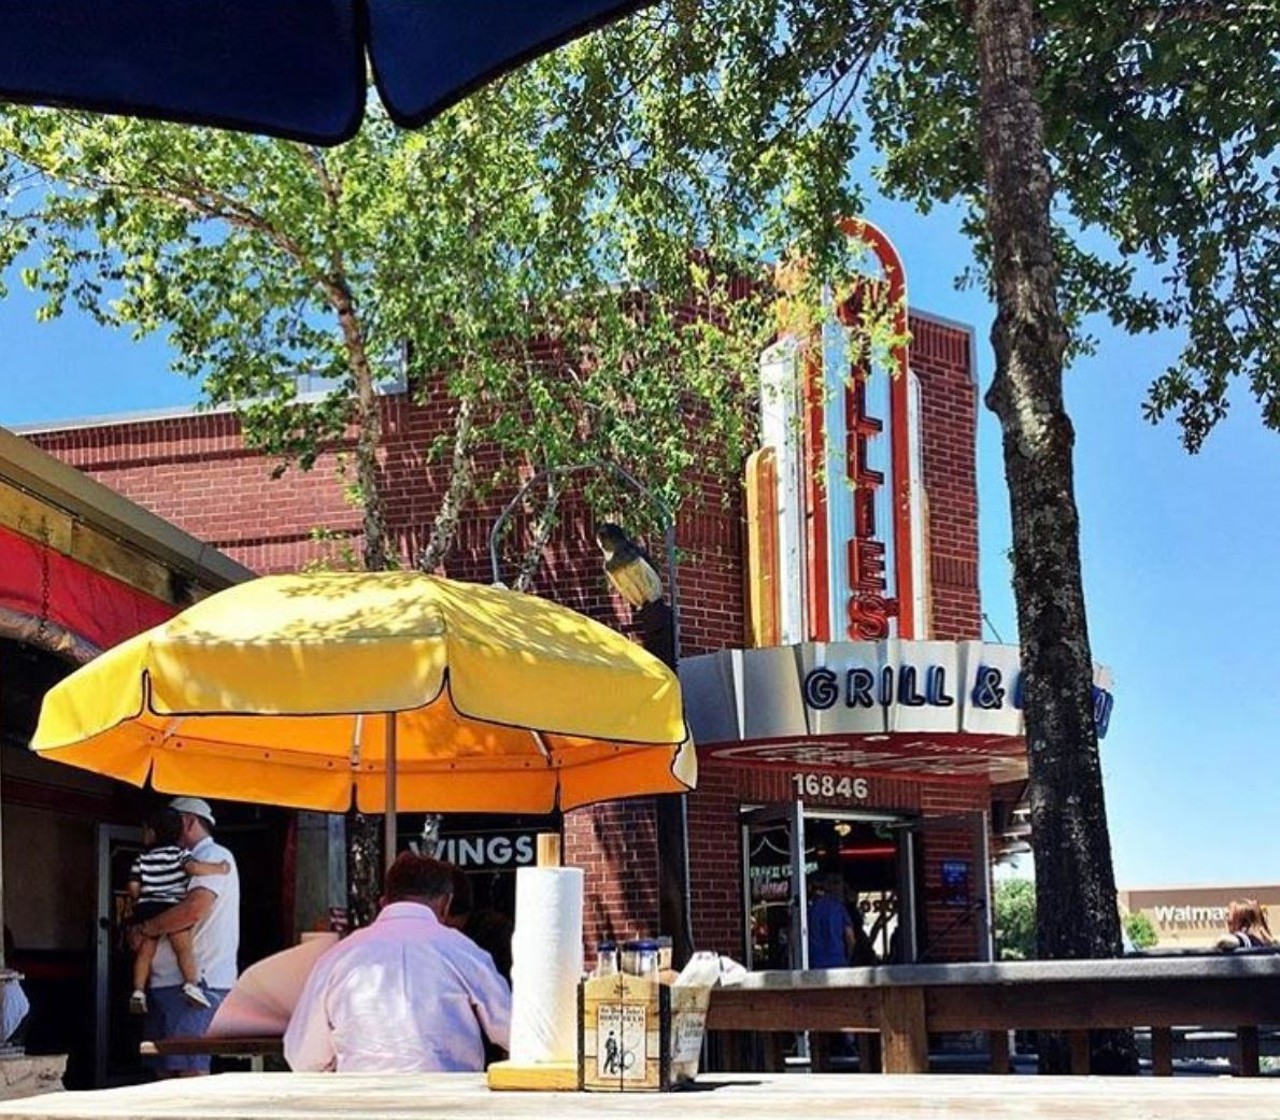 Willie’s Grill & Icehouse
Multiple locations, williesgrillandicehouse.com
Each Willie’s is a little bit different, but they’ve all got at least a few things in common. The first is having a play area for kids, the second is ice-cold drinks, and the third is tasty fried mushrooms.
Photo via Instagram / williesgrill